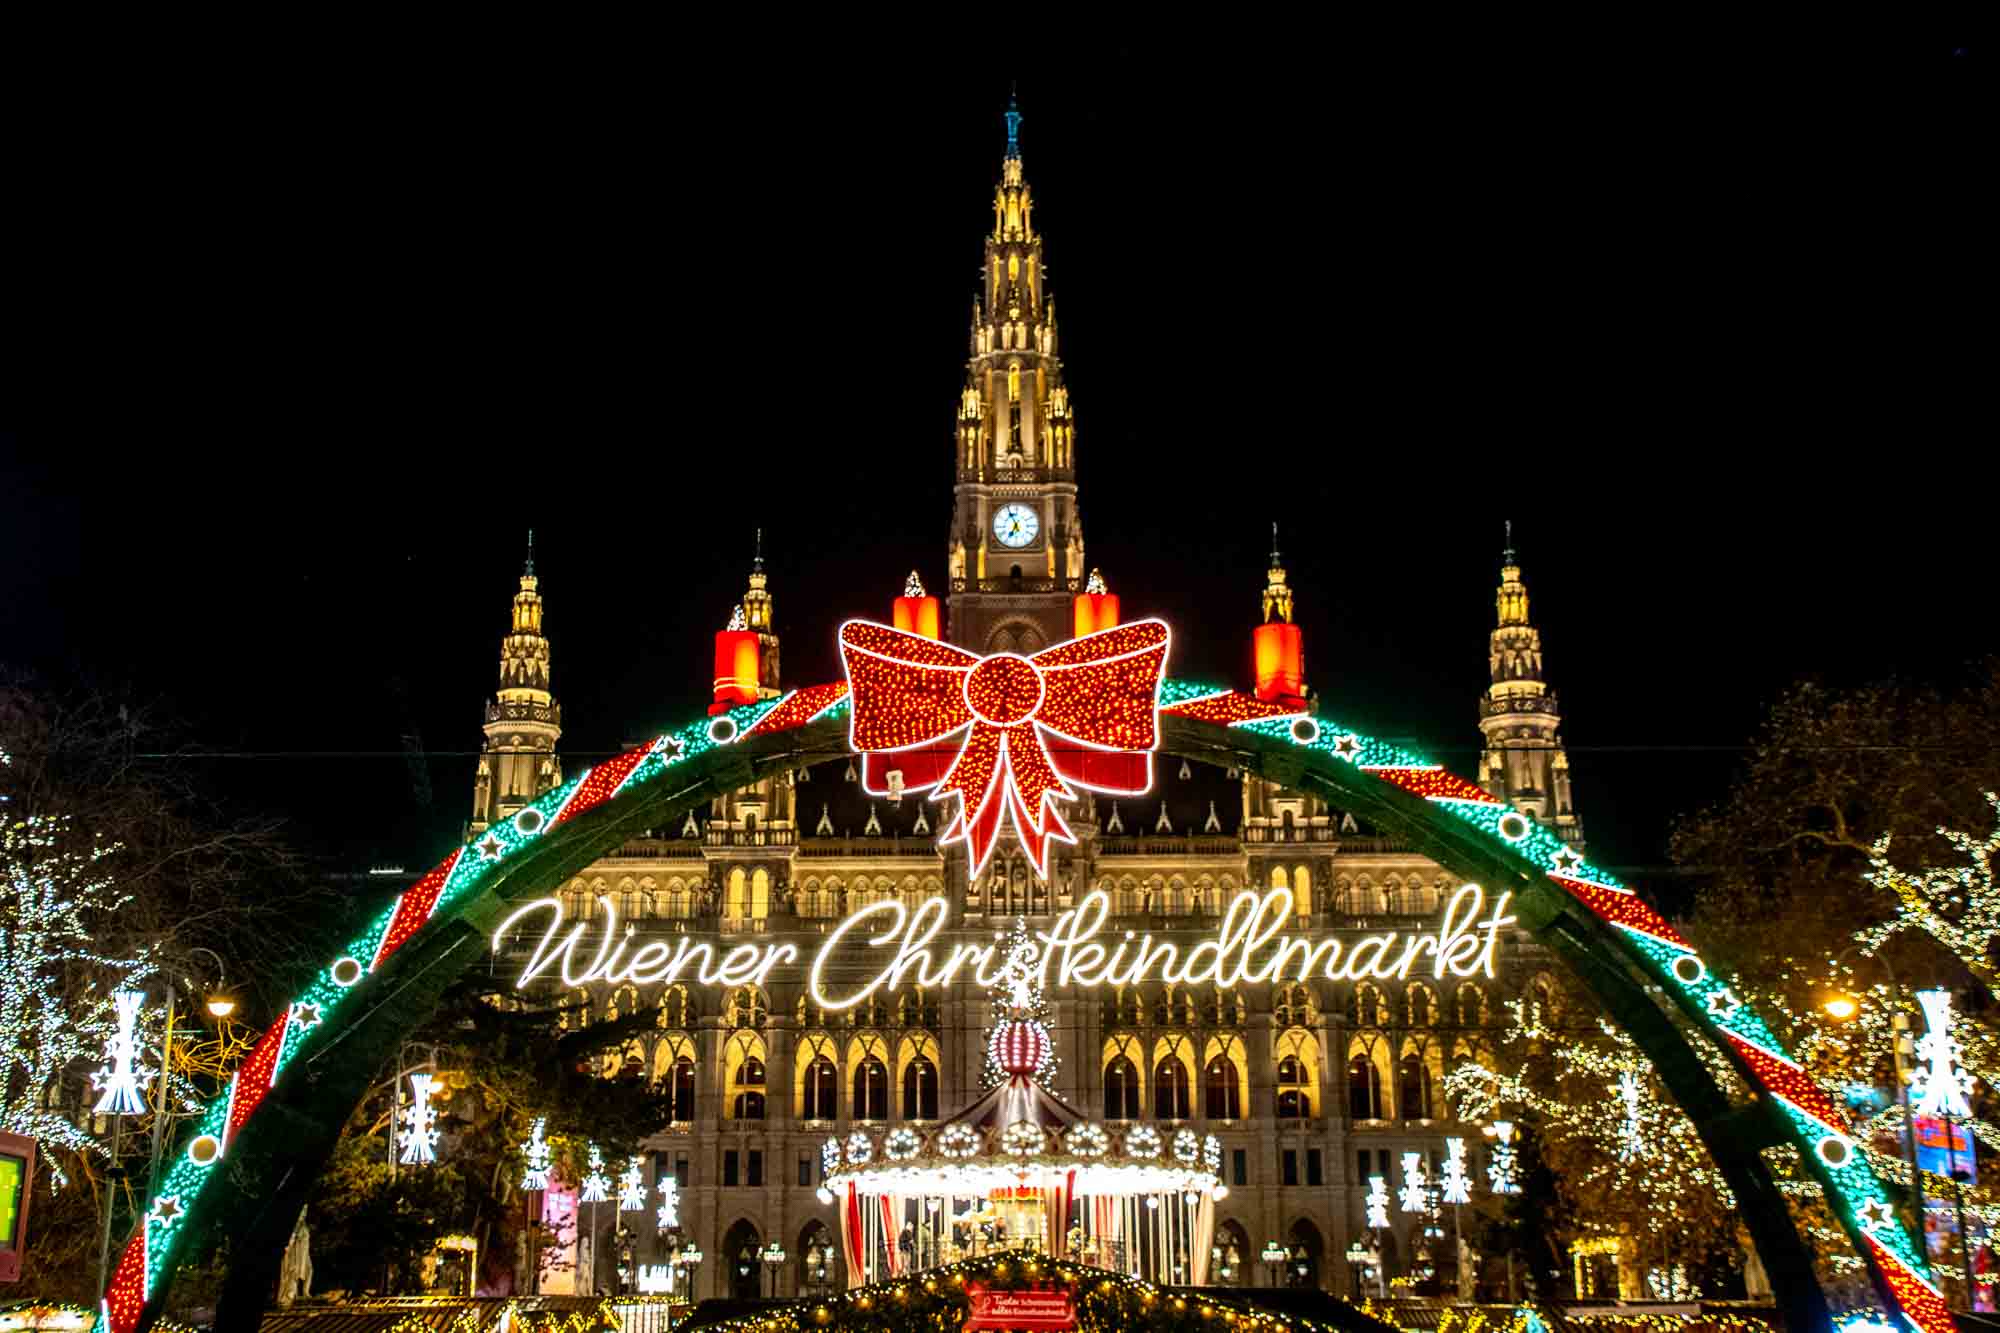 Ornate building lit up at night behind an arch of Christmas lights and sign for "Wiener Christkindlmarkt" (Vienna Christmas market).